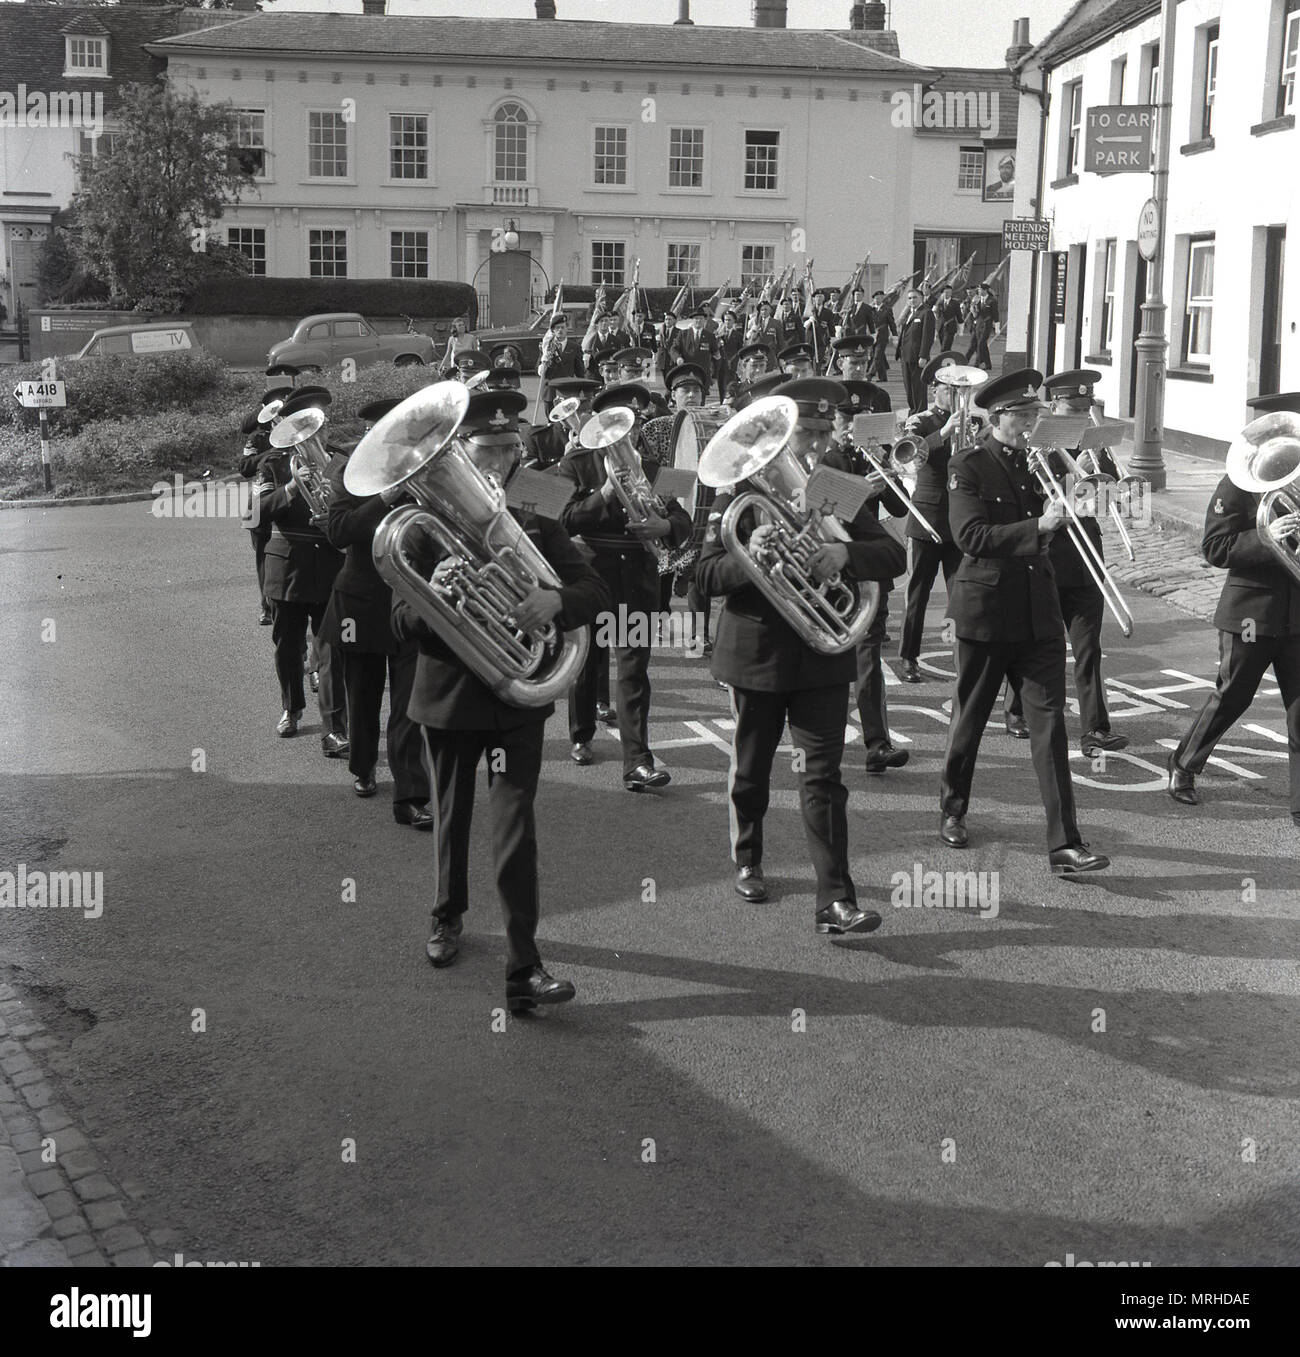 1964, historical, marching band of the Royal British Legion, Aylesbury, England, UK. The legion is a miltary charity that raises money to care for injured soliders. Stock Photo